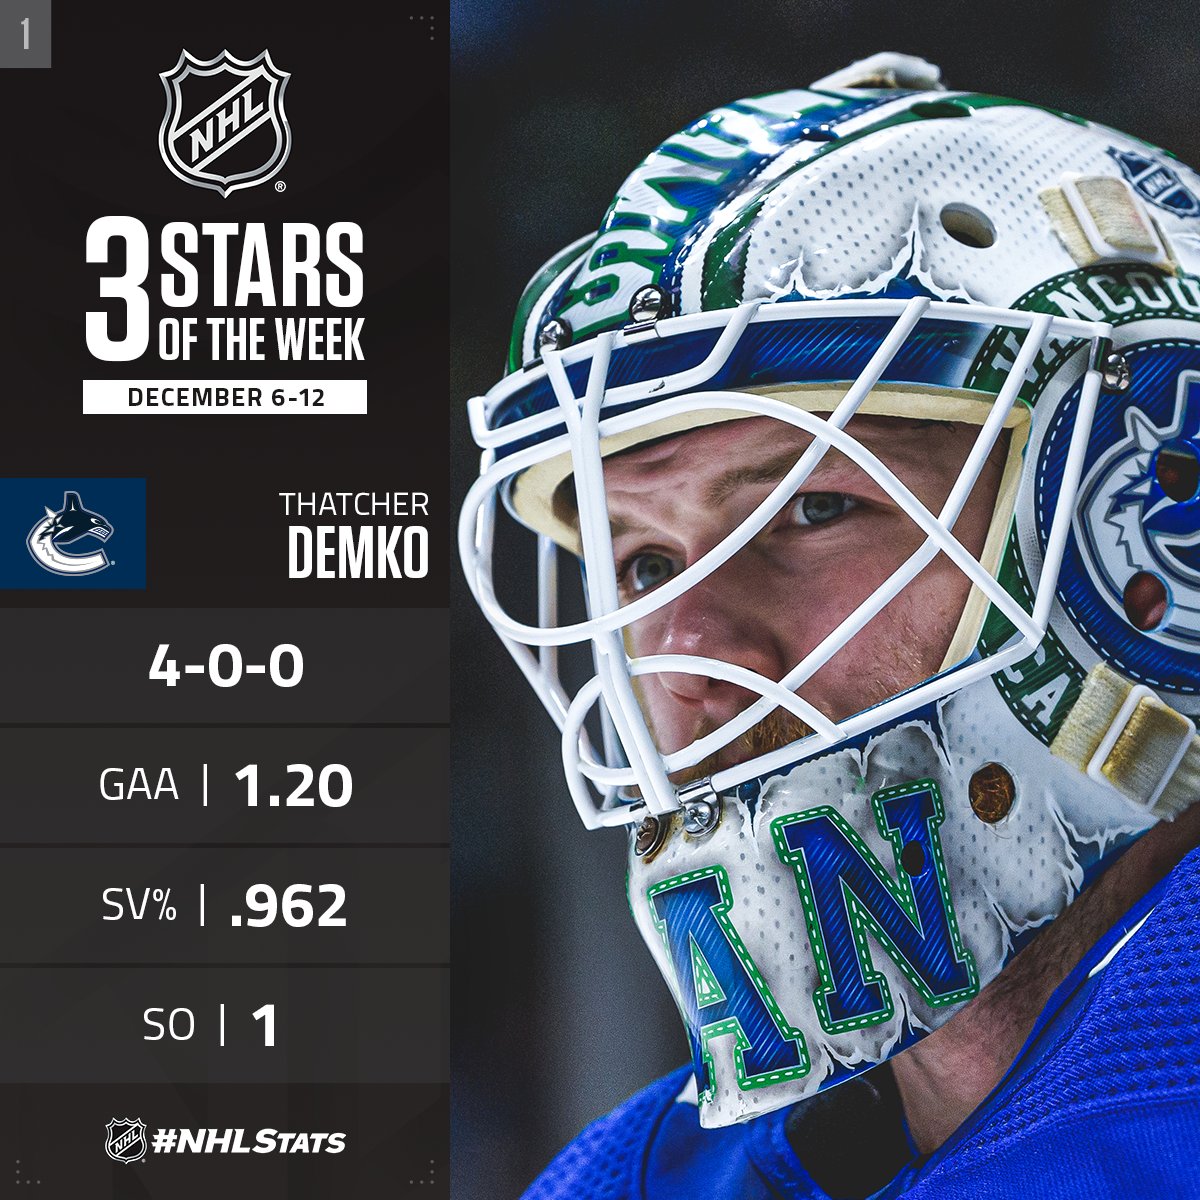 Thatcher Demko went 4-0-0 with a 1.20 GAA, .962 SV% and one shutout to earn  @nhl First Star of the Week honours ⭐️